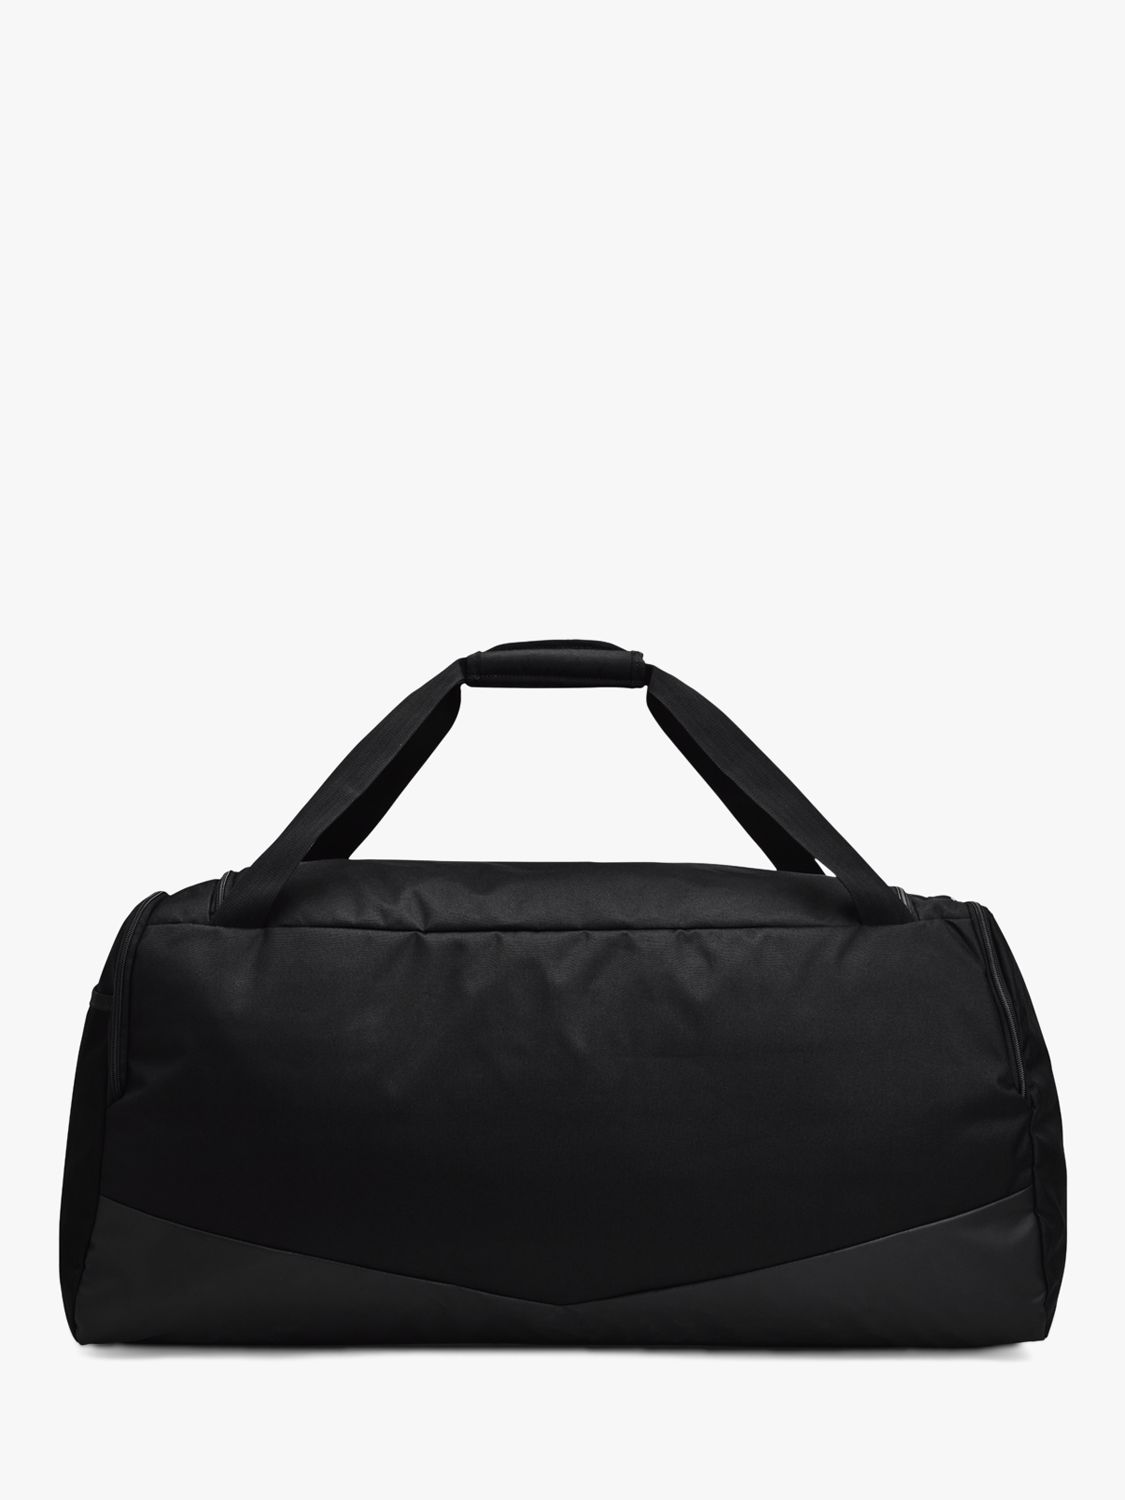 Buy Under Armour Undeniable 5.0 Large Duffle Bag, Black/Silver Online at johnlewis.com